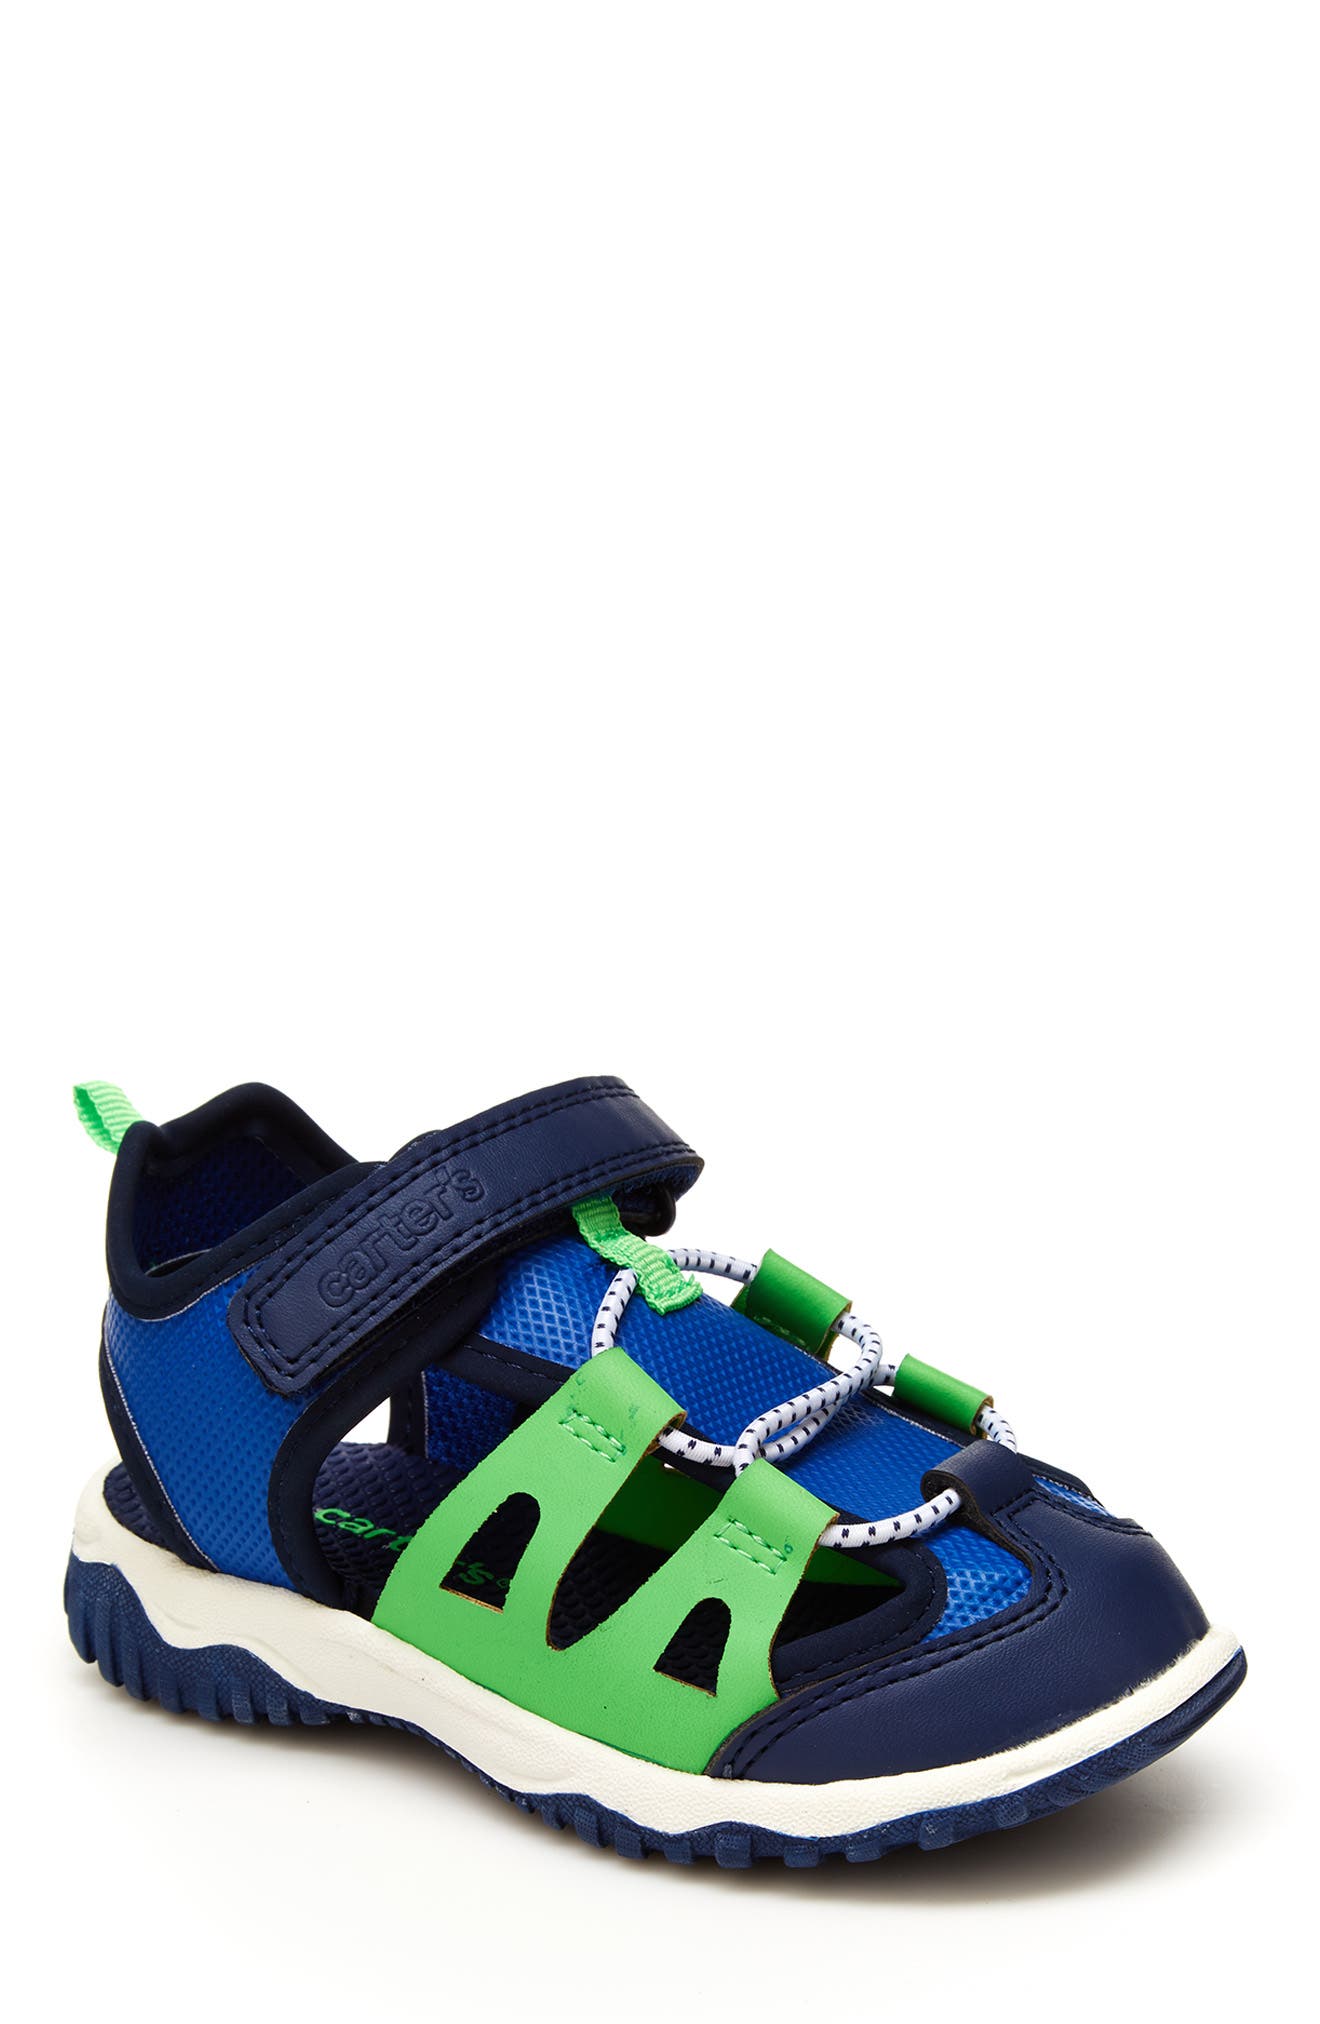 Carter's Kids' Shay Bungee Laced Sandal In Blue